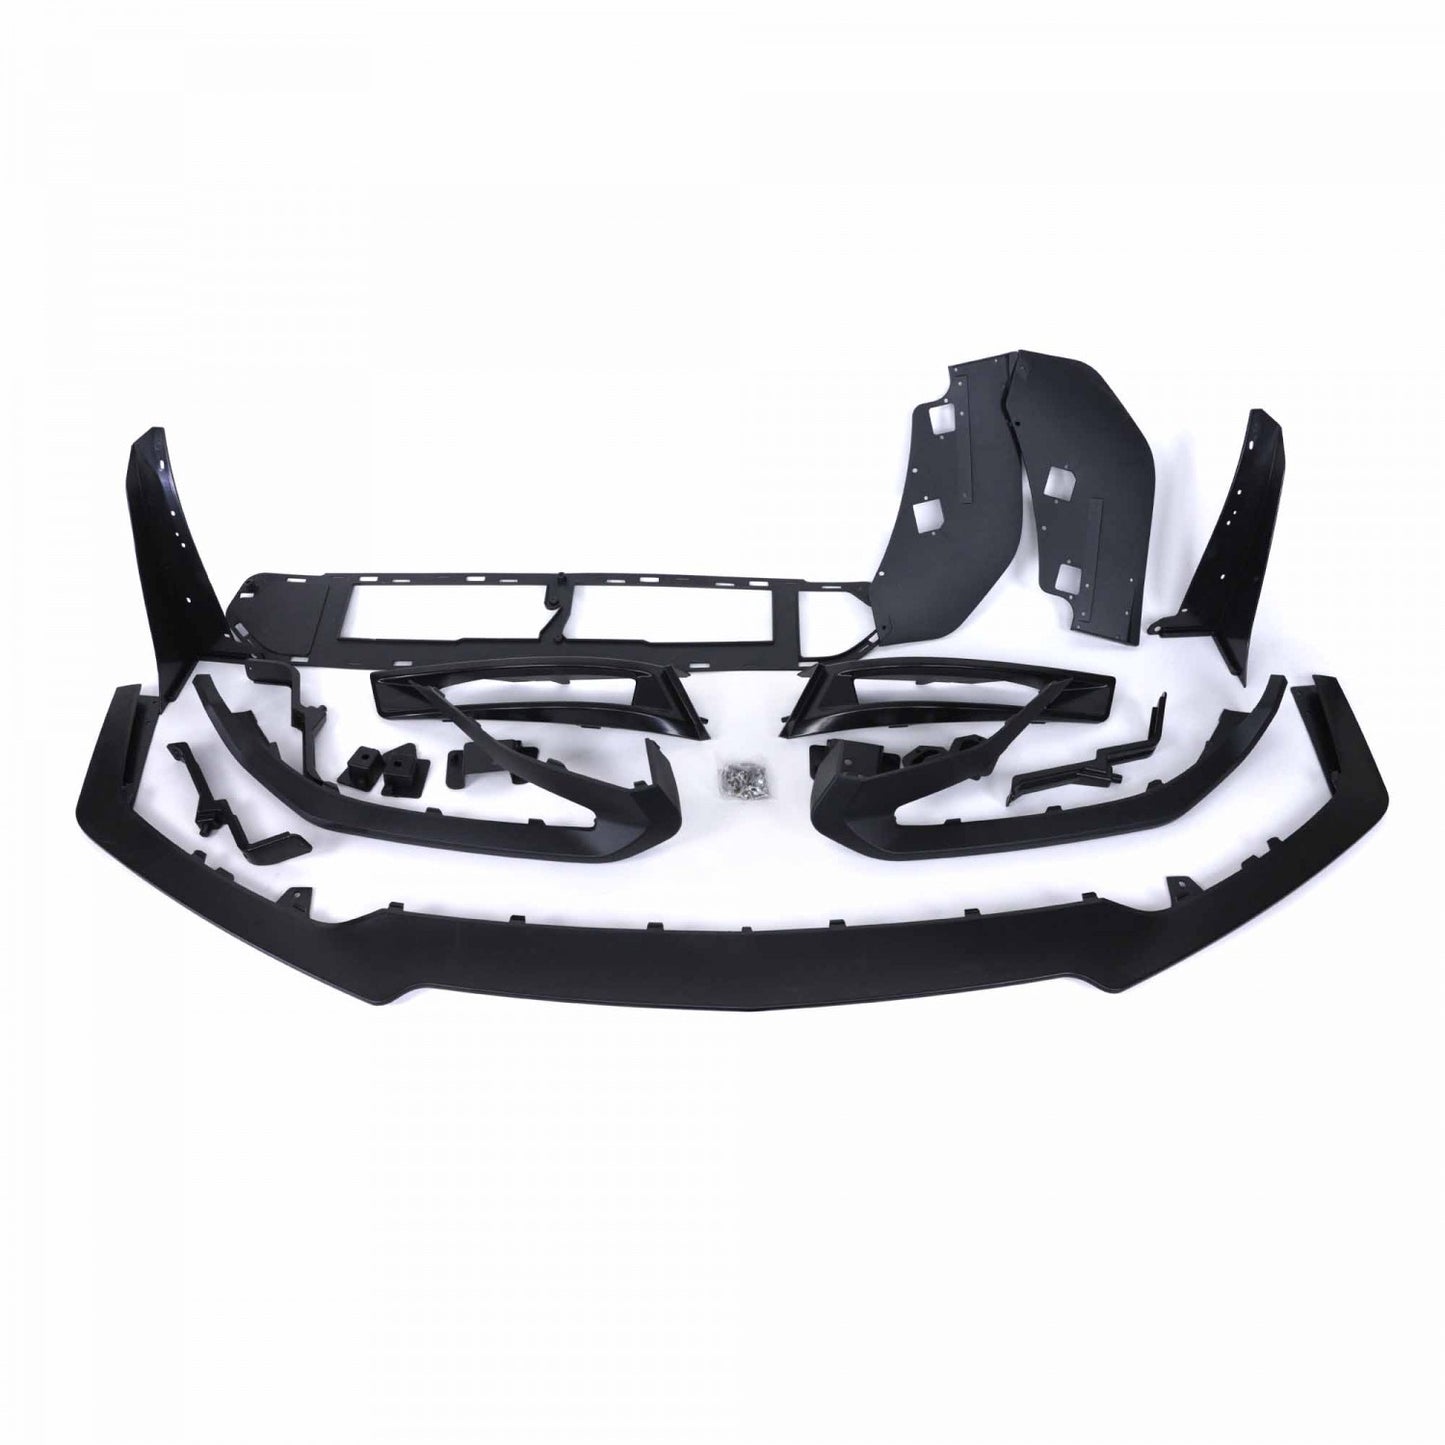 2018-23 S550 Mustang GT500 Style Front Bumper Cover